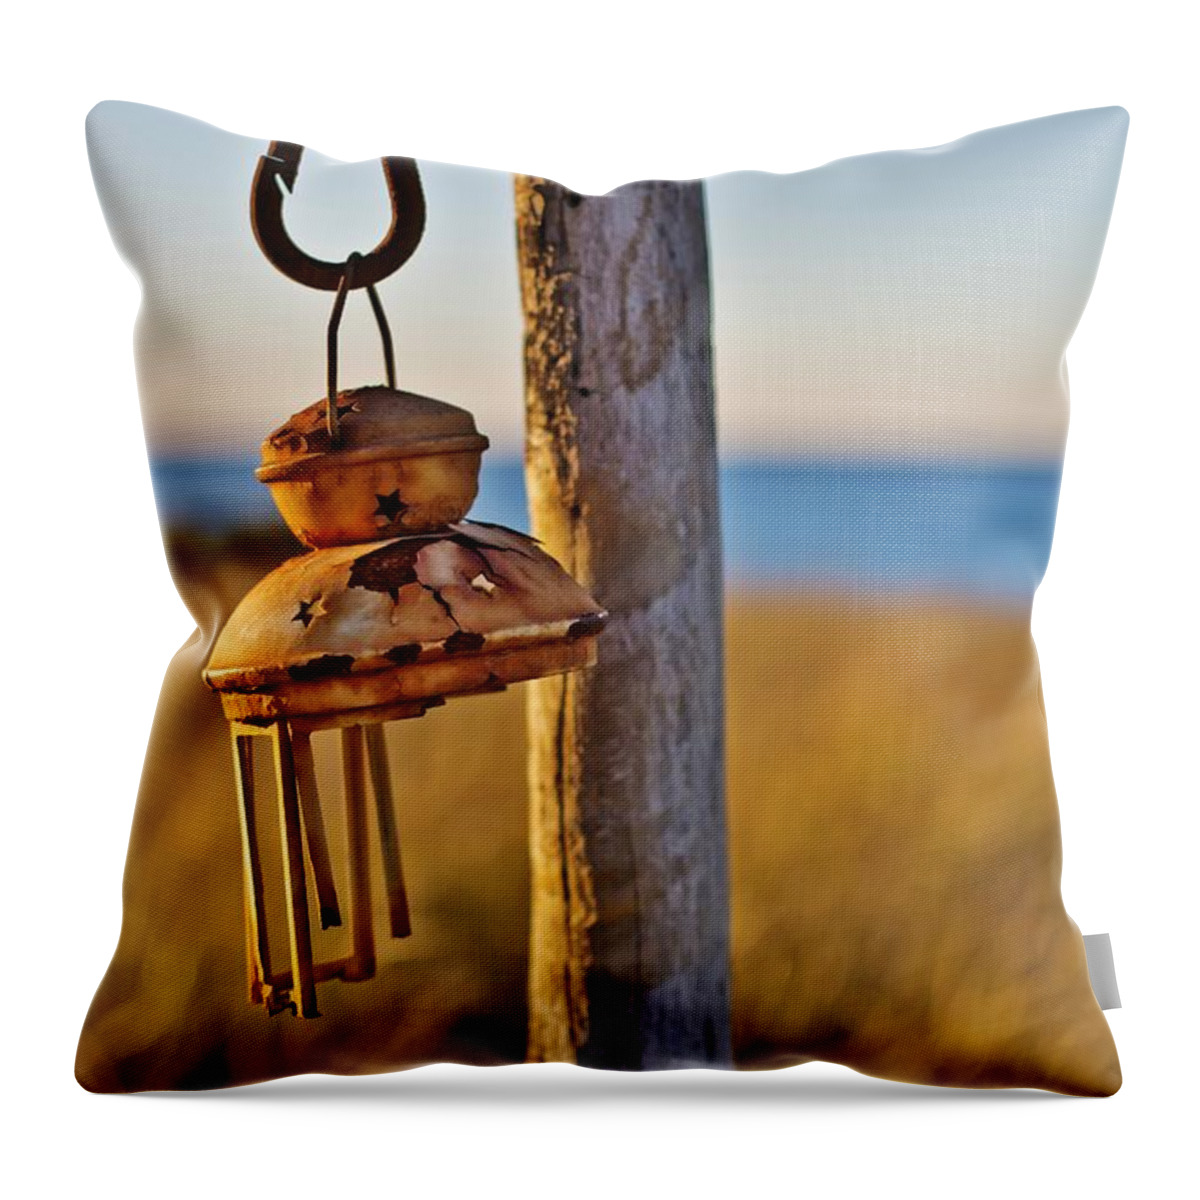 Dune Shack Throw Pillow featuring the photograph Rusted Beauty by Marisa Geraghty Photography